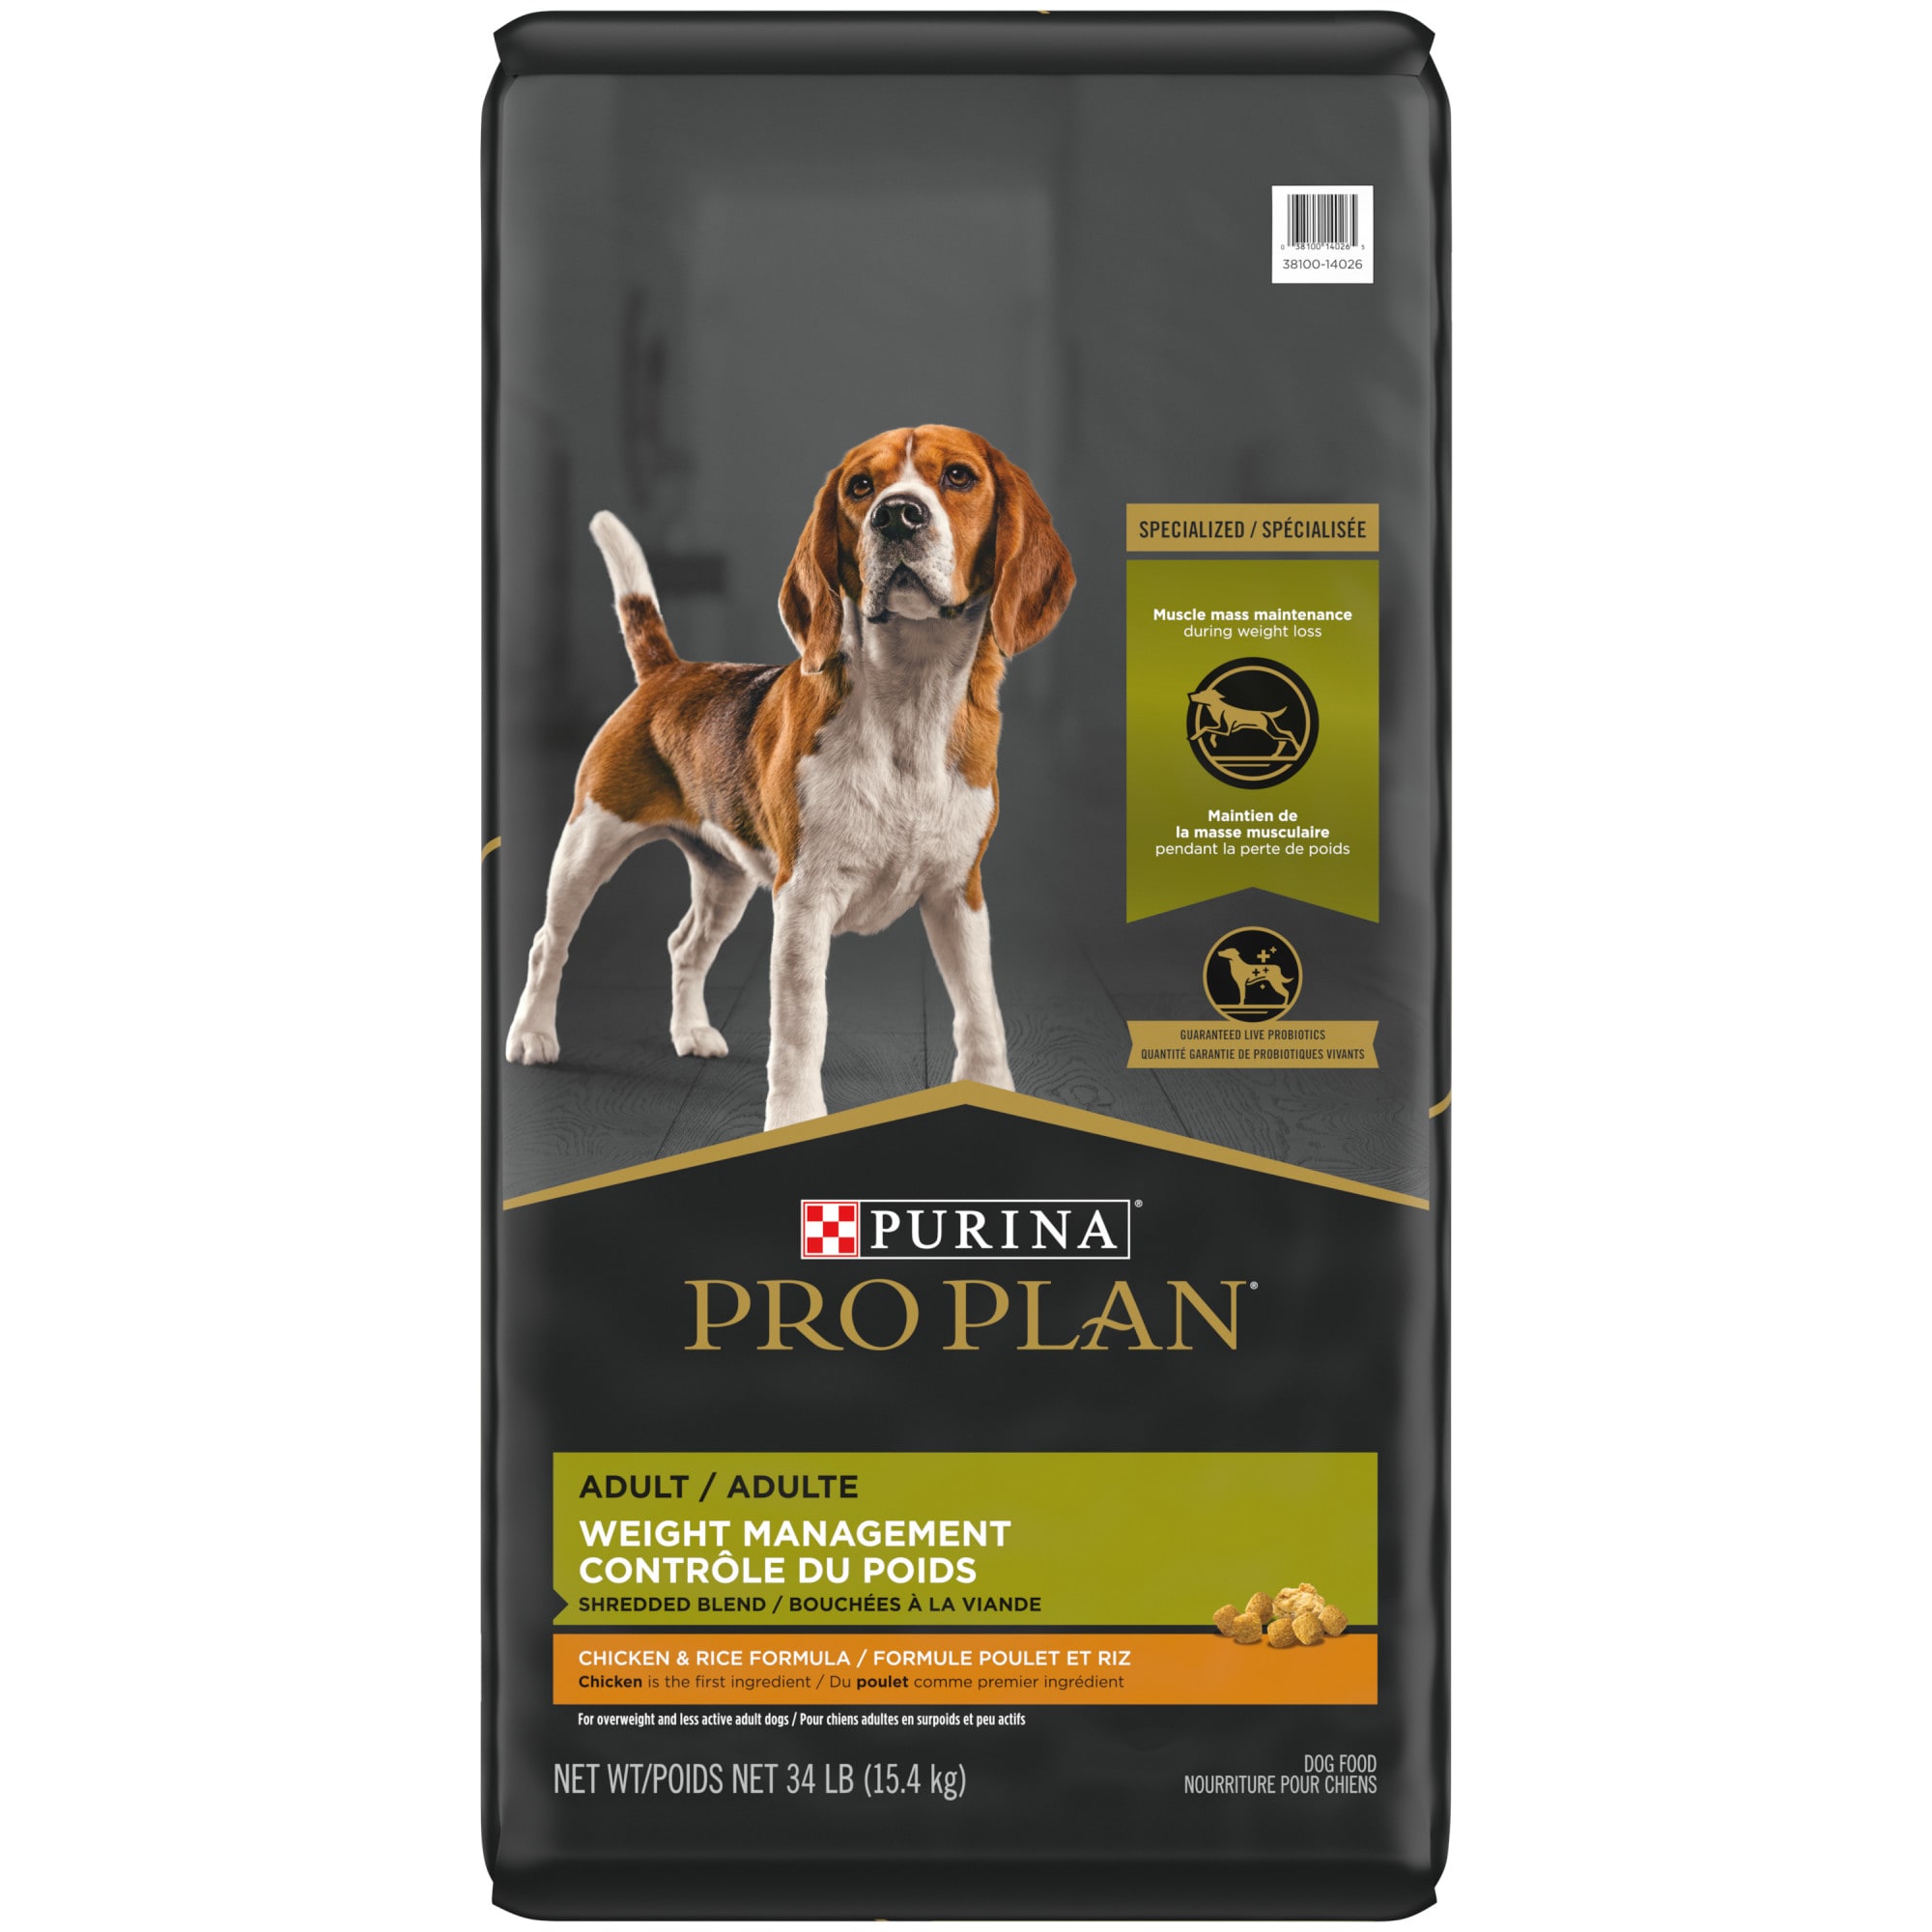 Purina Pro Plan With Probiotics Shredded Blend Weight Management